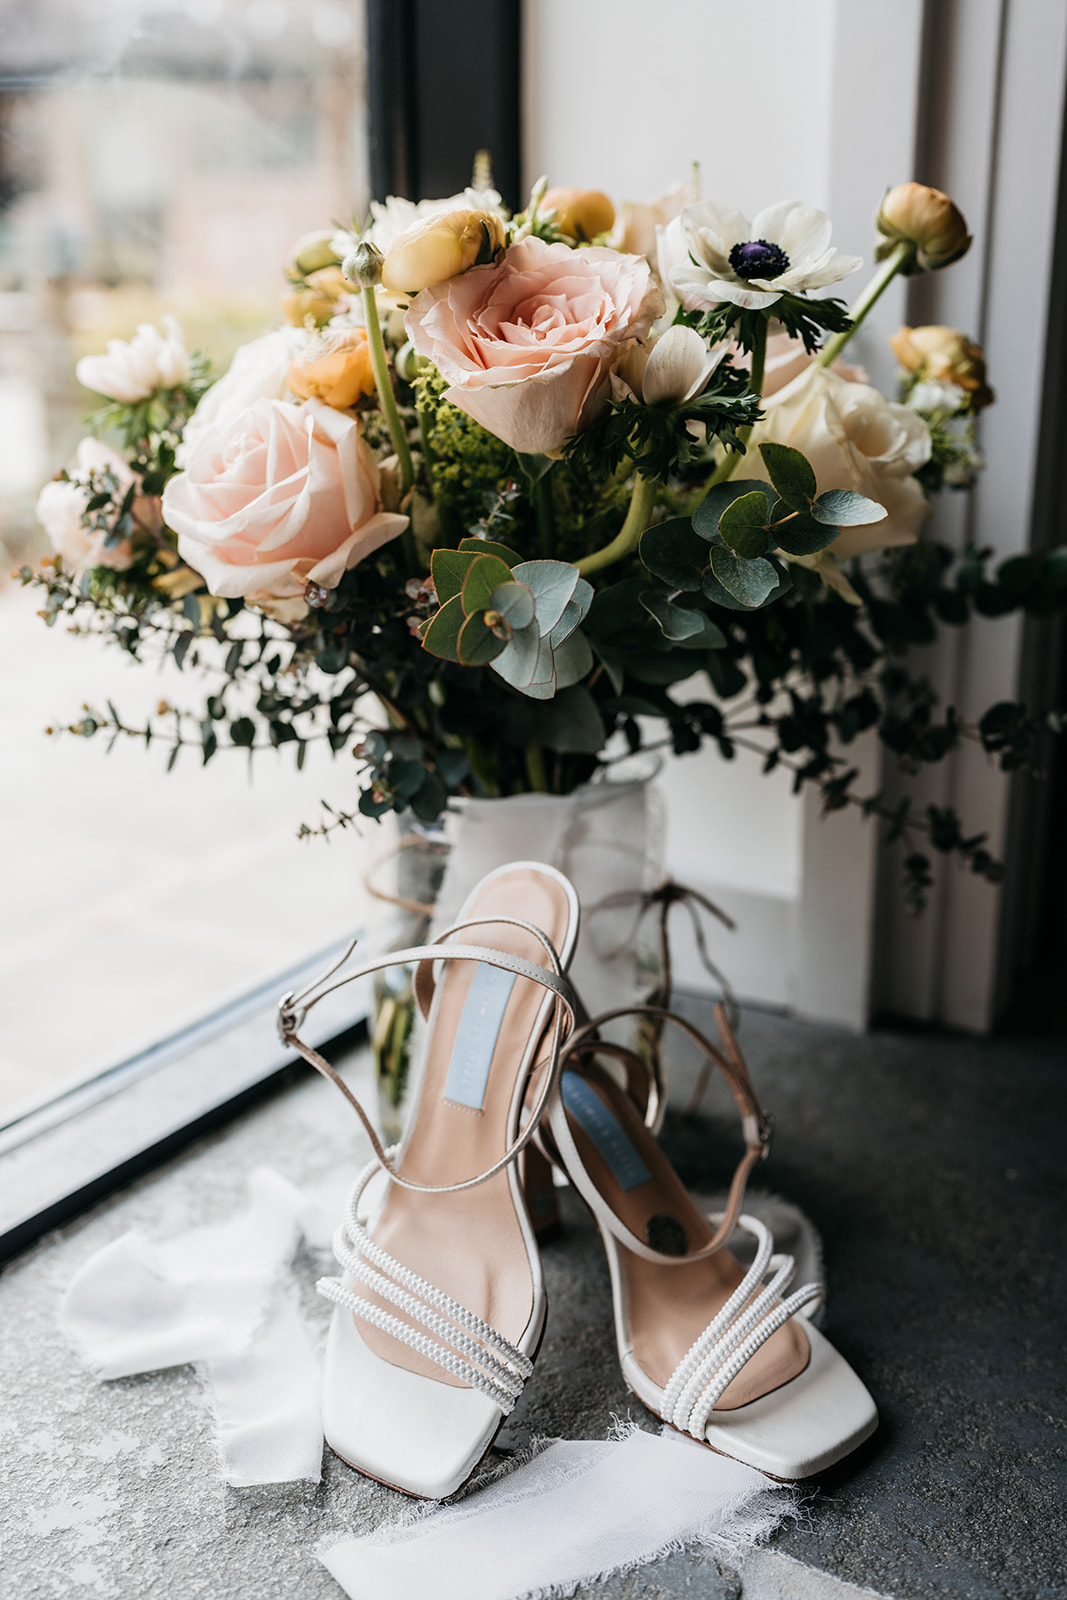 wedding flowers by Floral Findings and wedding shoes